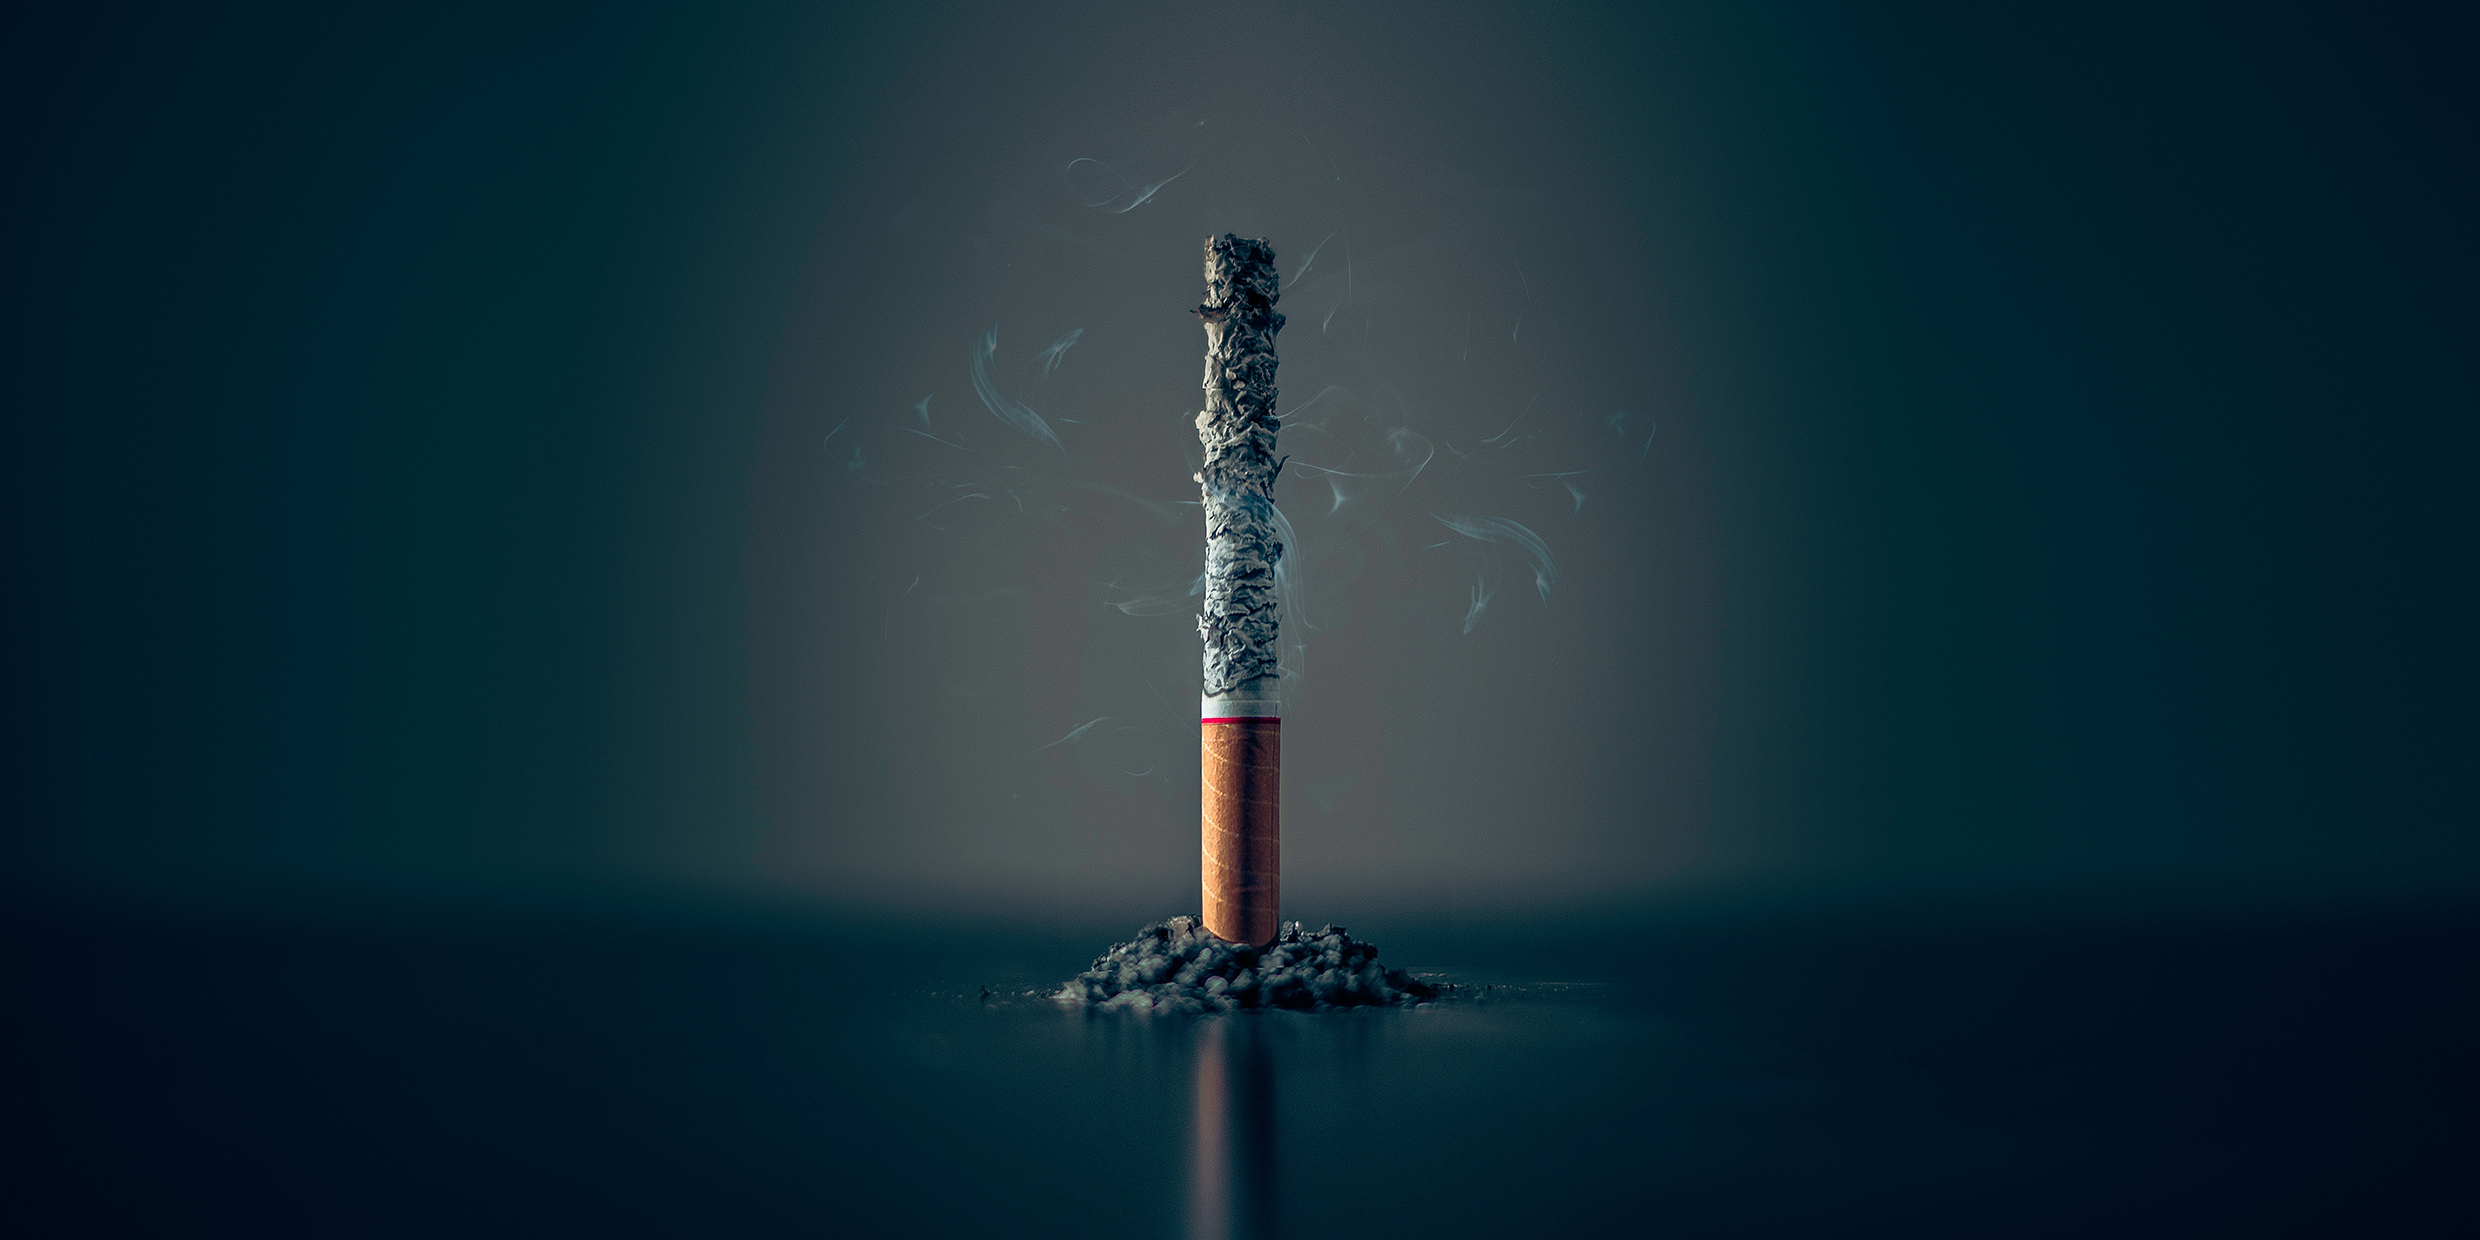 Image of a cigarette which has burned mostly to ash